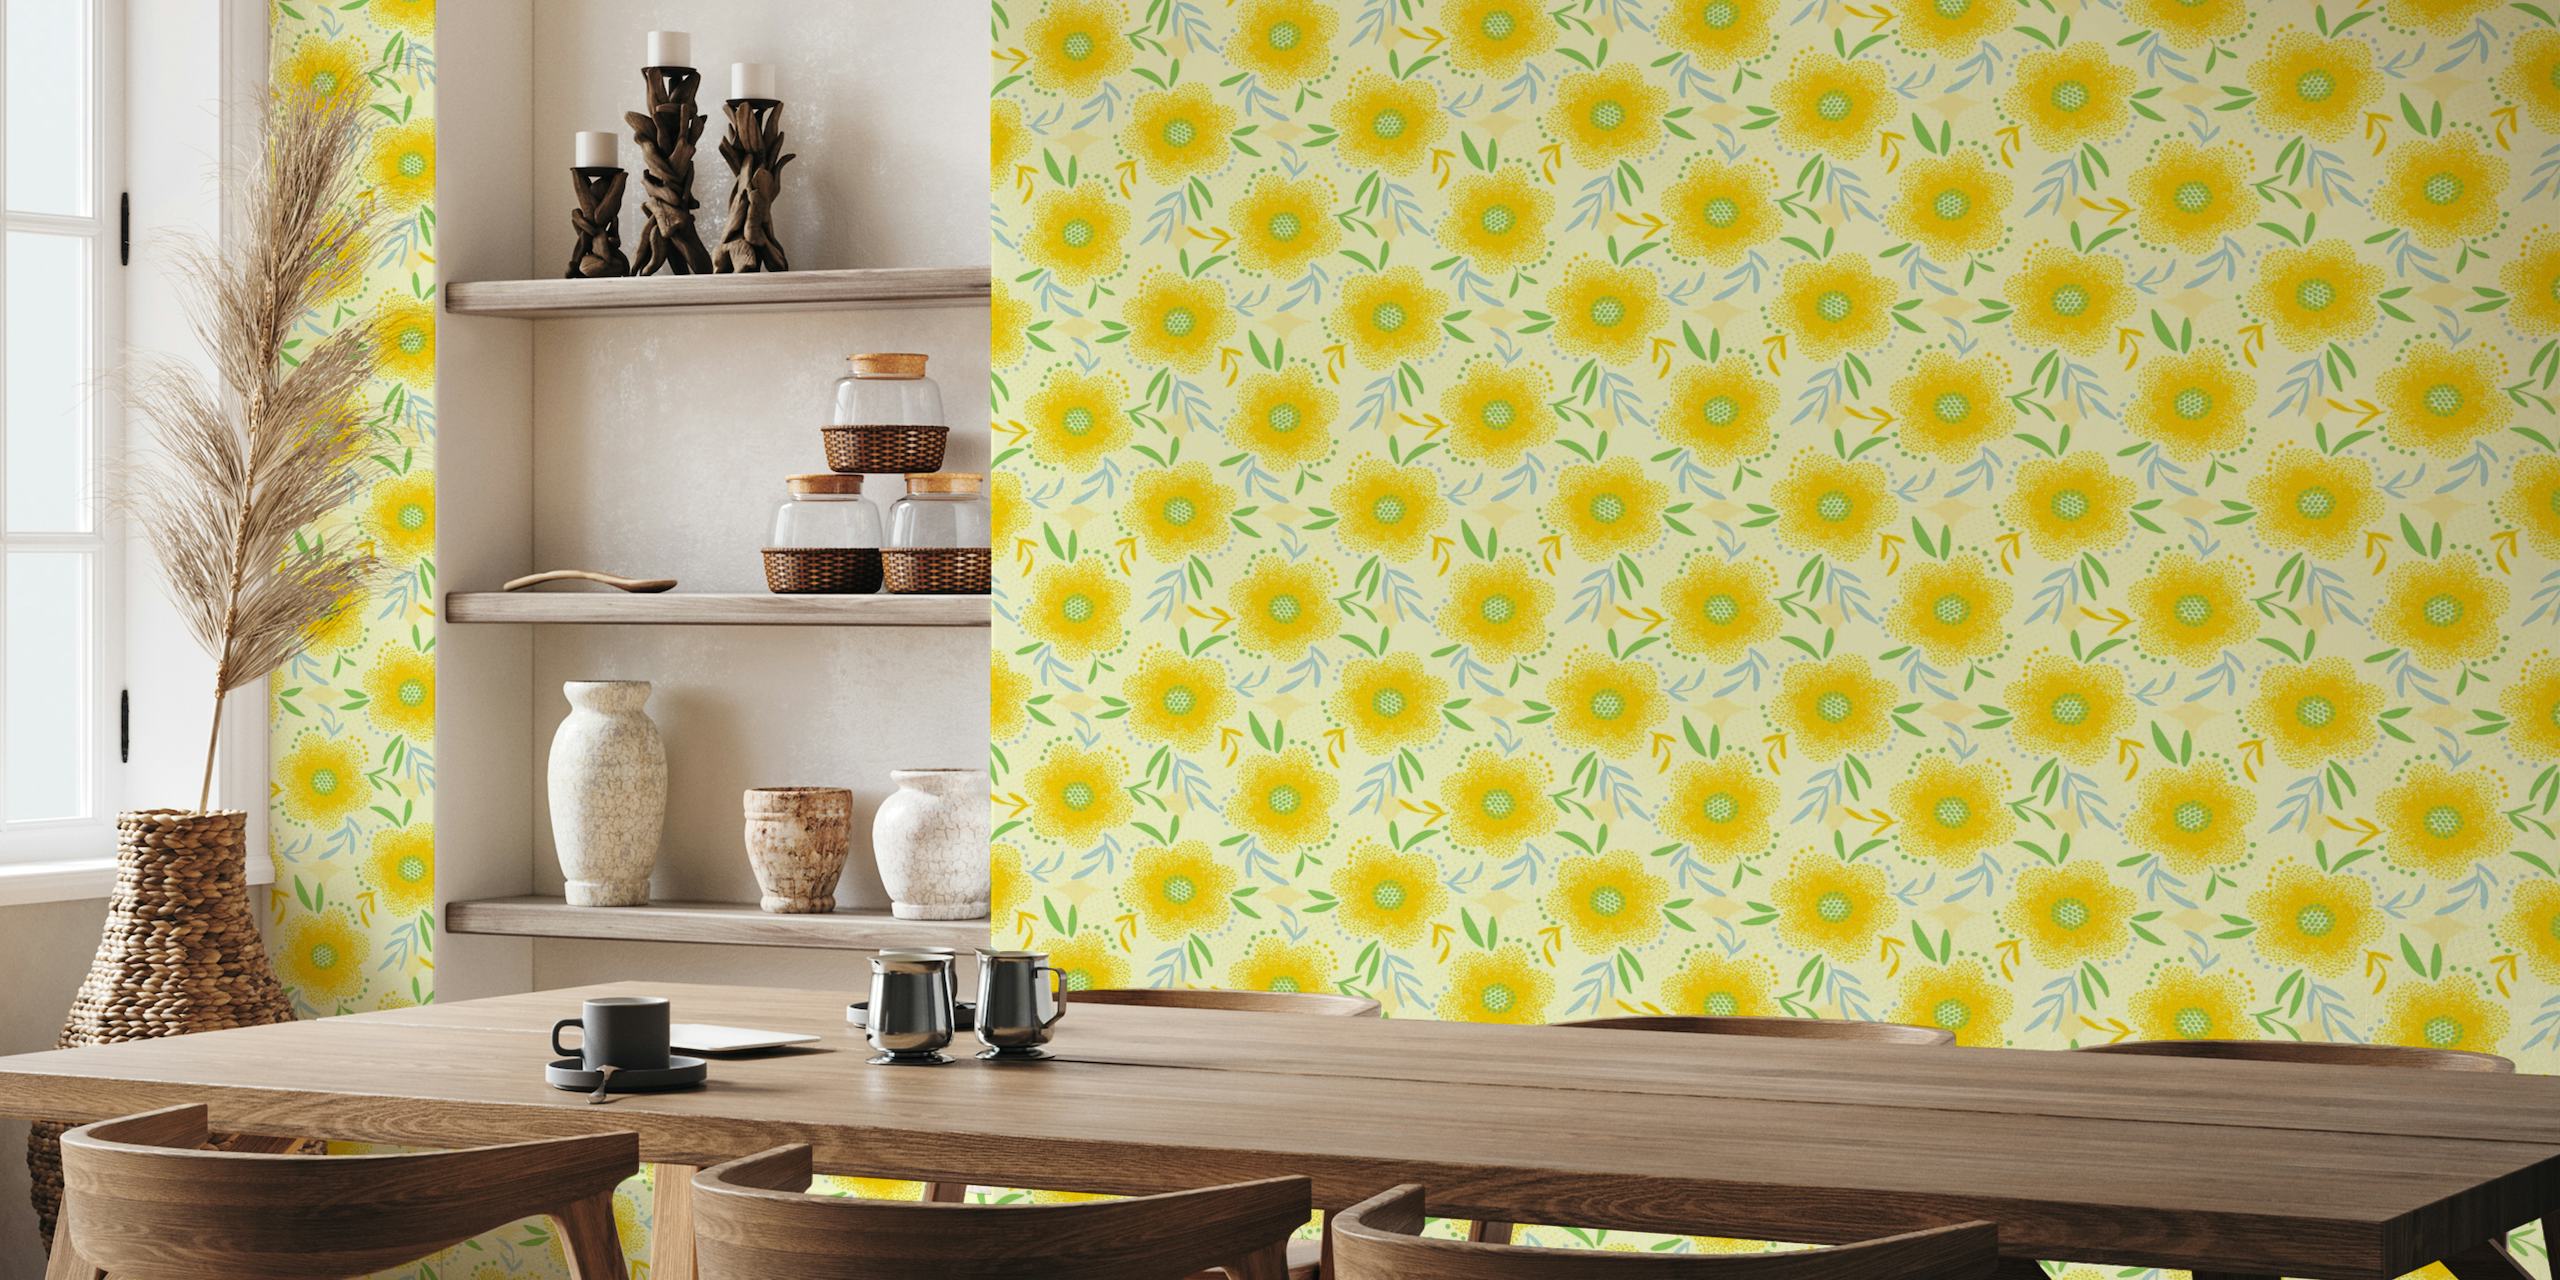 Bright yellow and green boho style floral wall mural from happywall.com